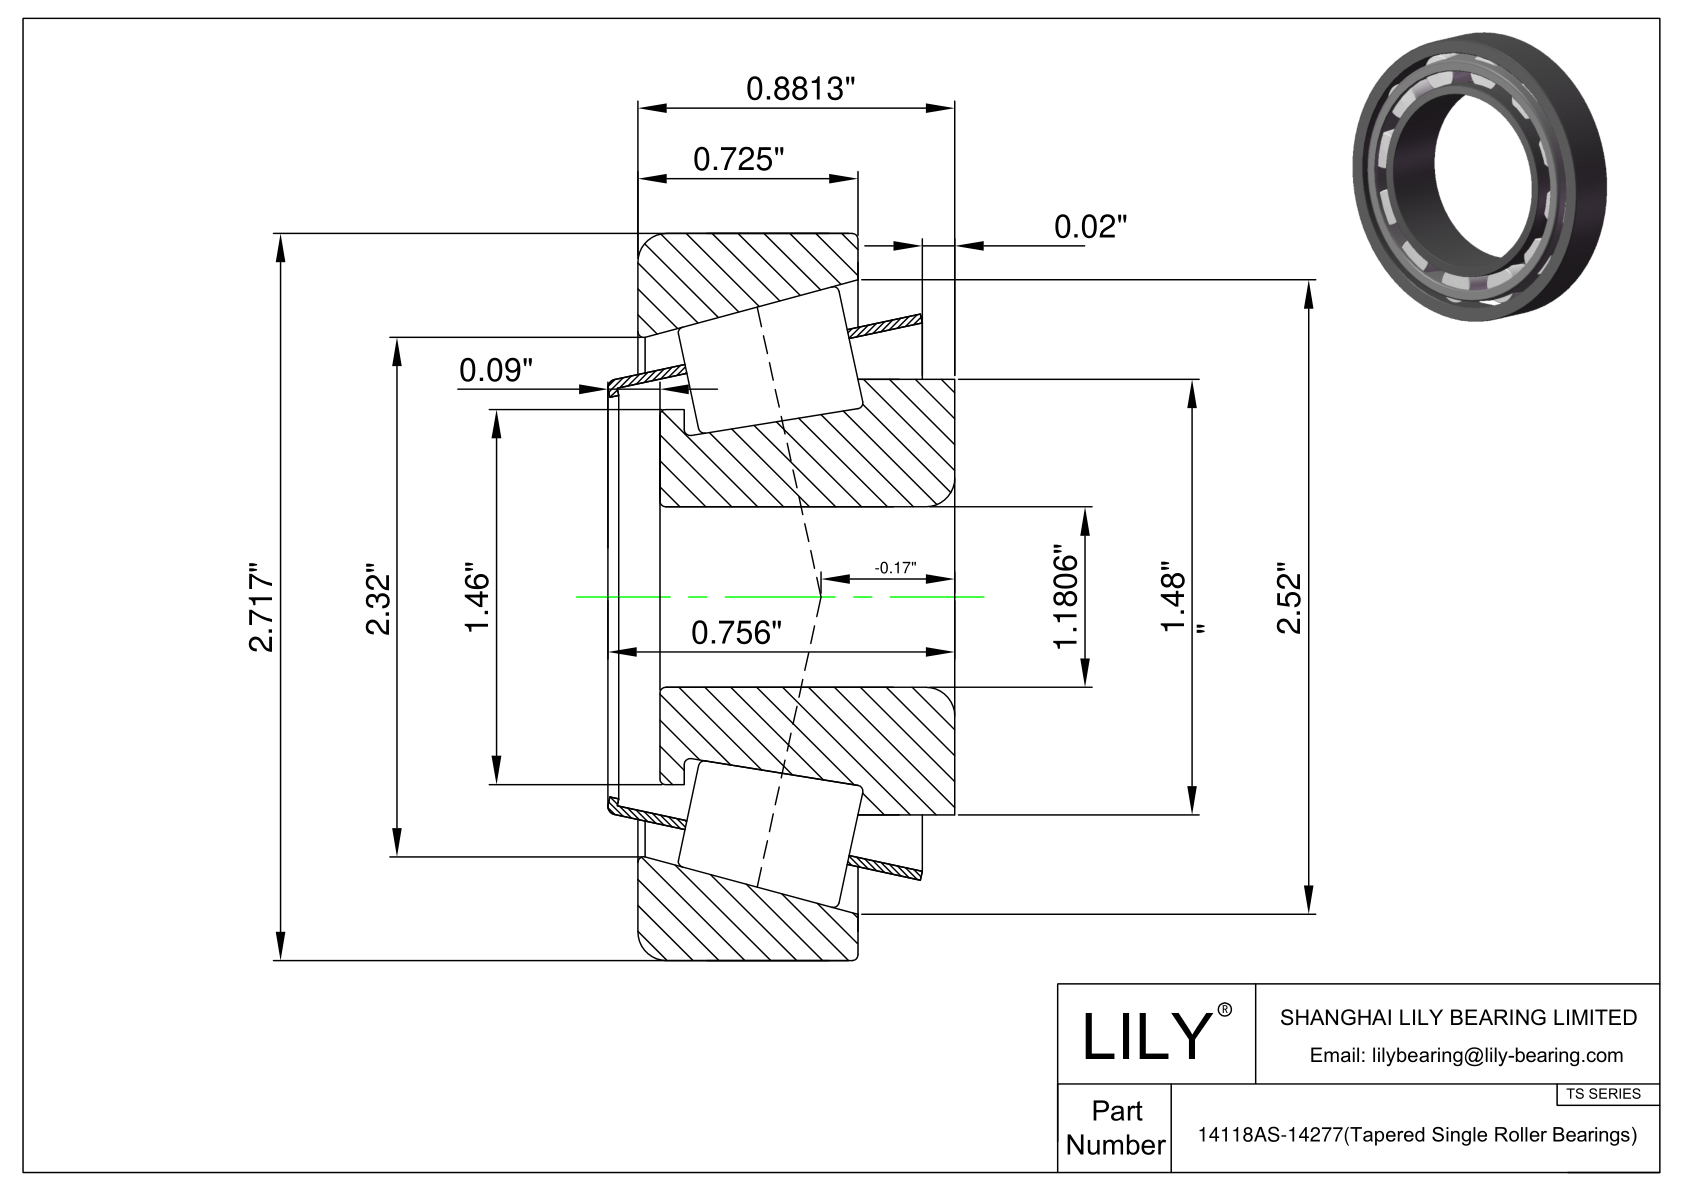 14118AS-14277 TS (Tapered Single Roller Bearings) (Imperial) cad drawing